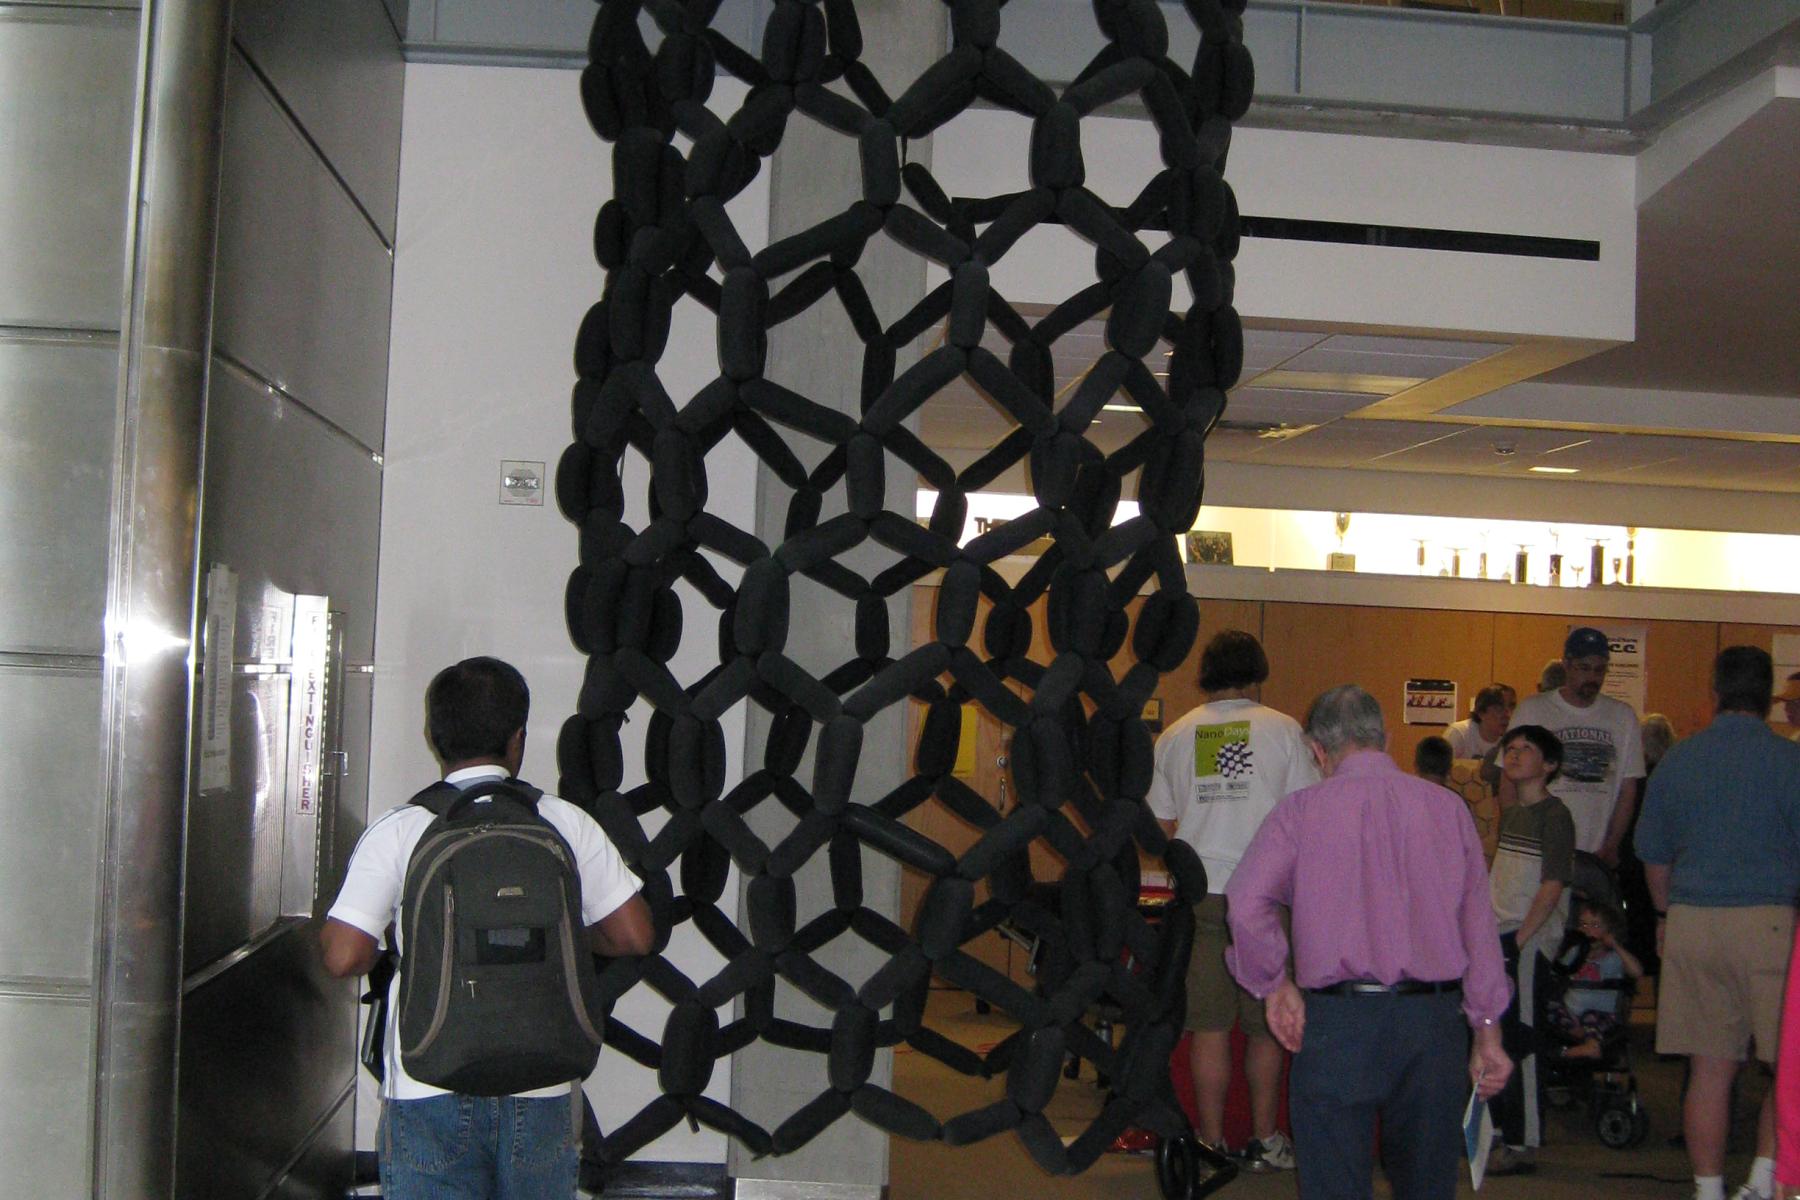 A long balloon model of a carbon nanotube hanging from the ceiling.